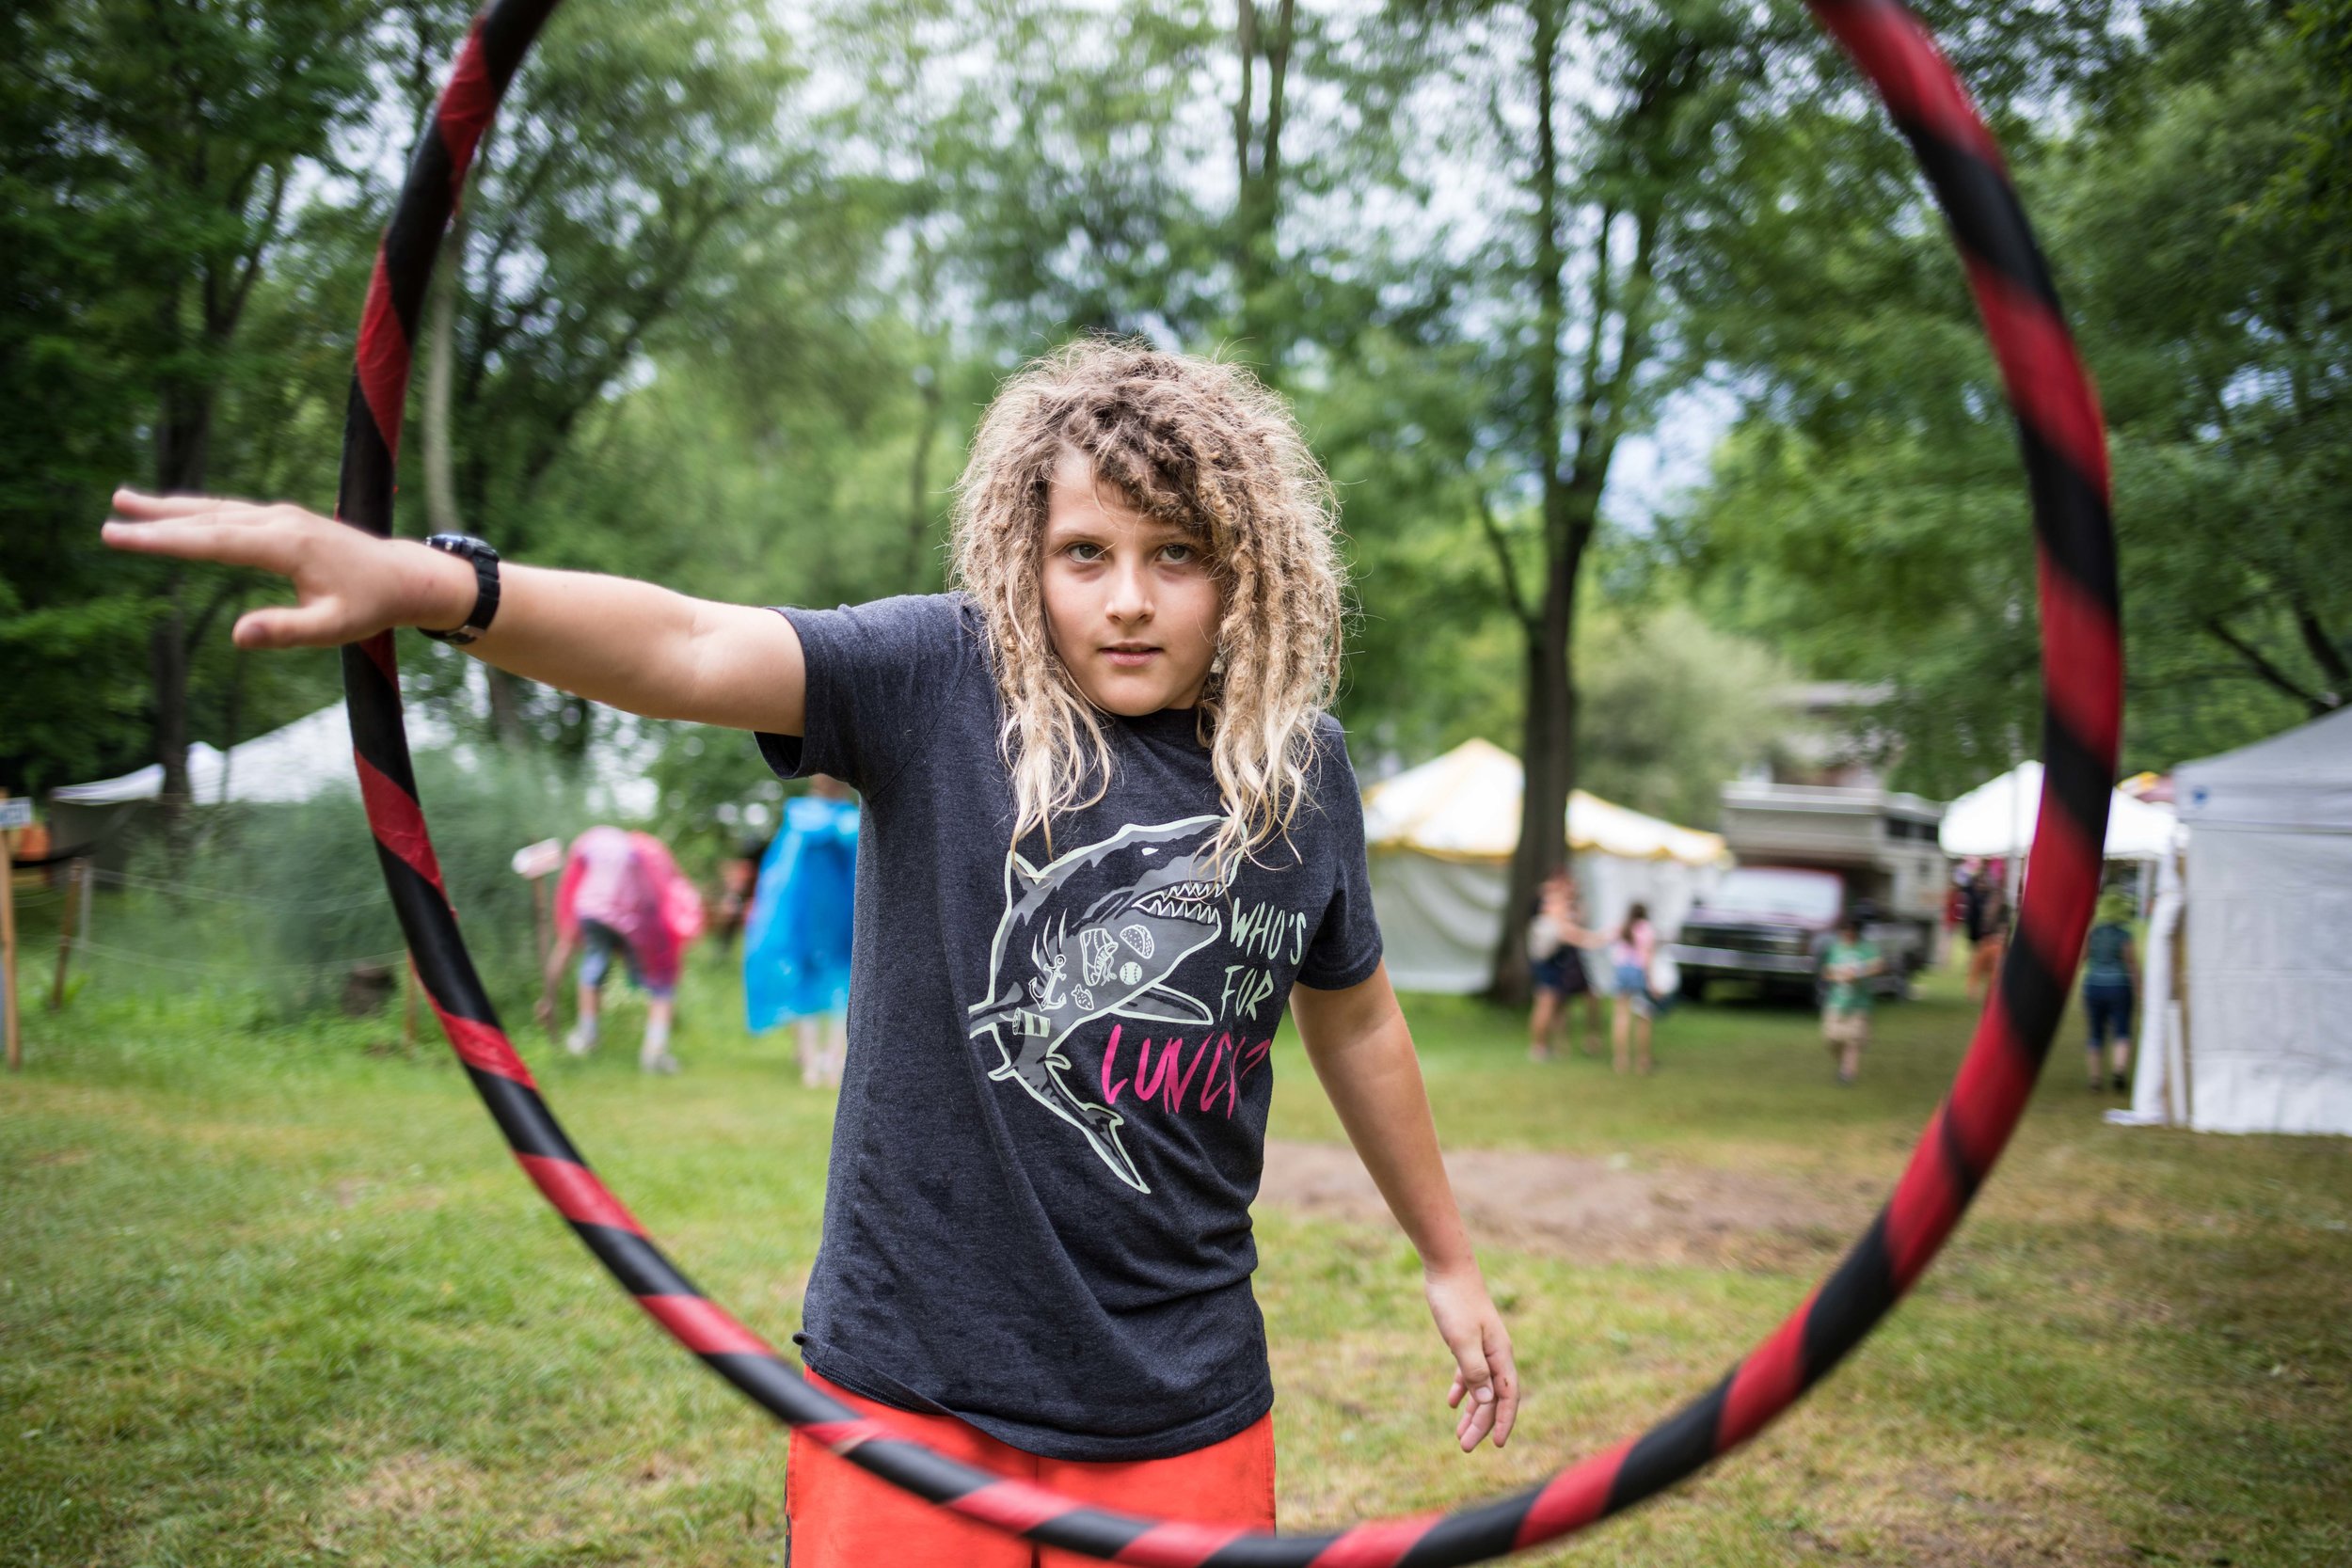  A kid facing the camera spinning a hula hoop in his arms 